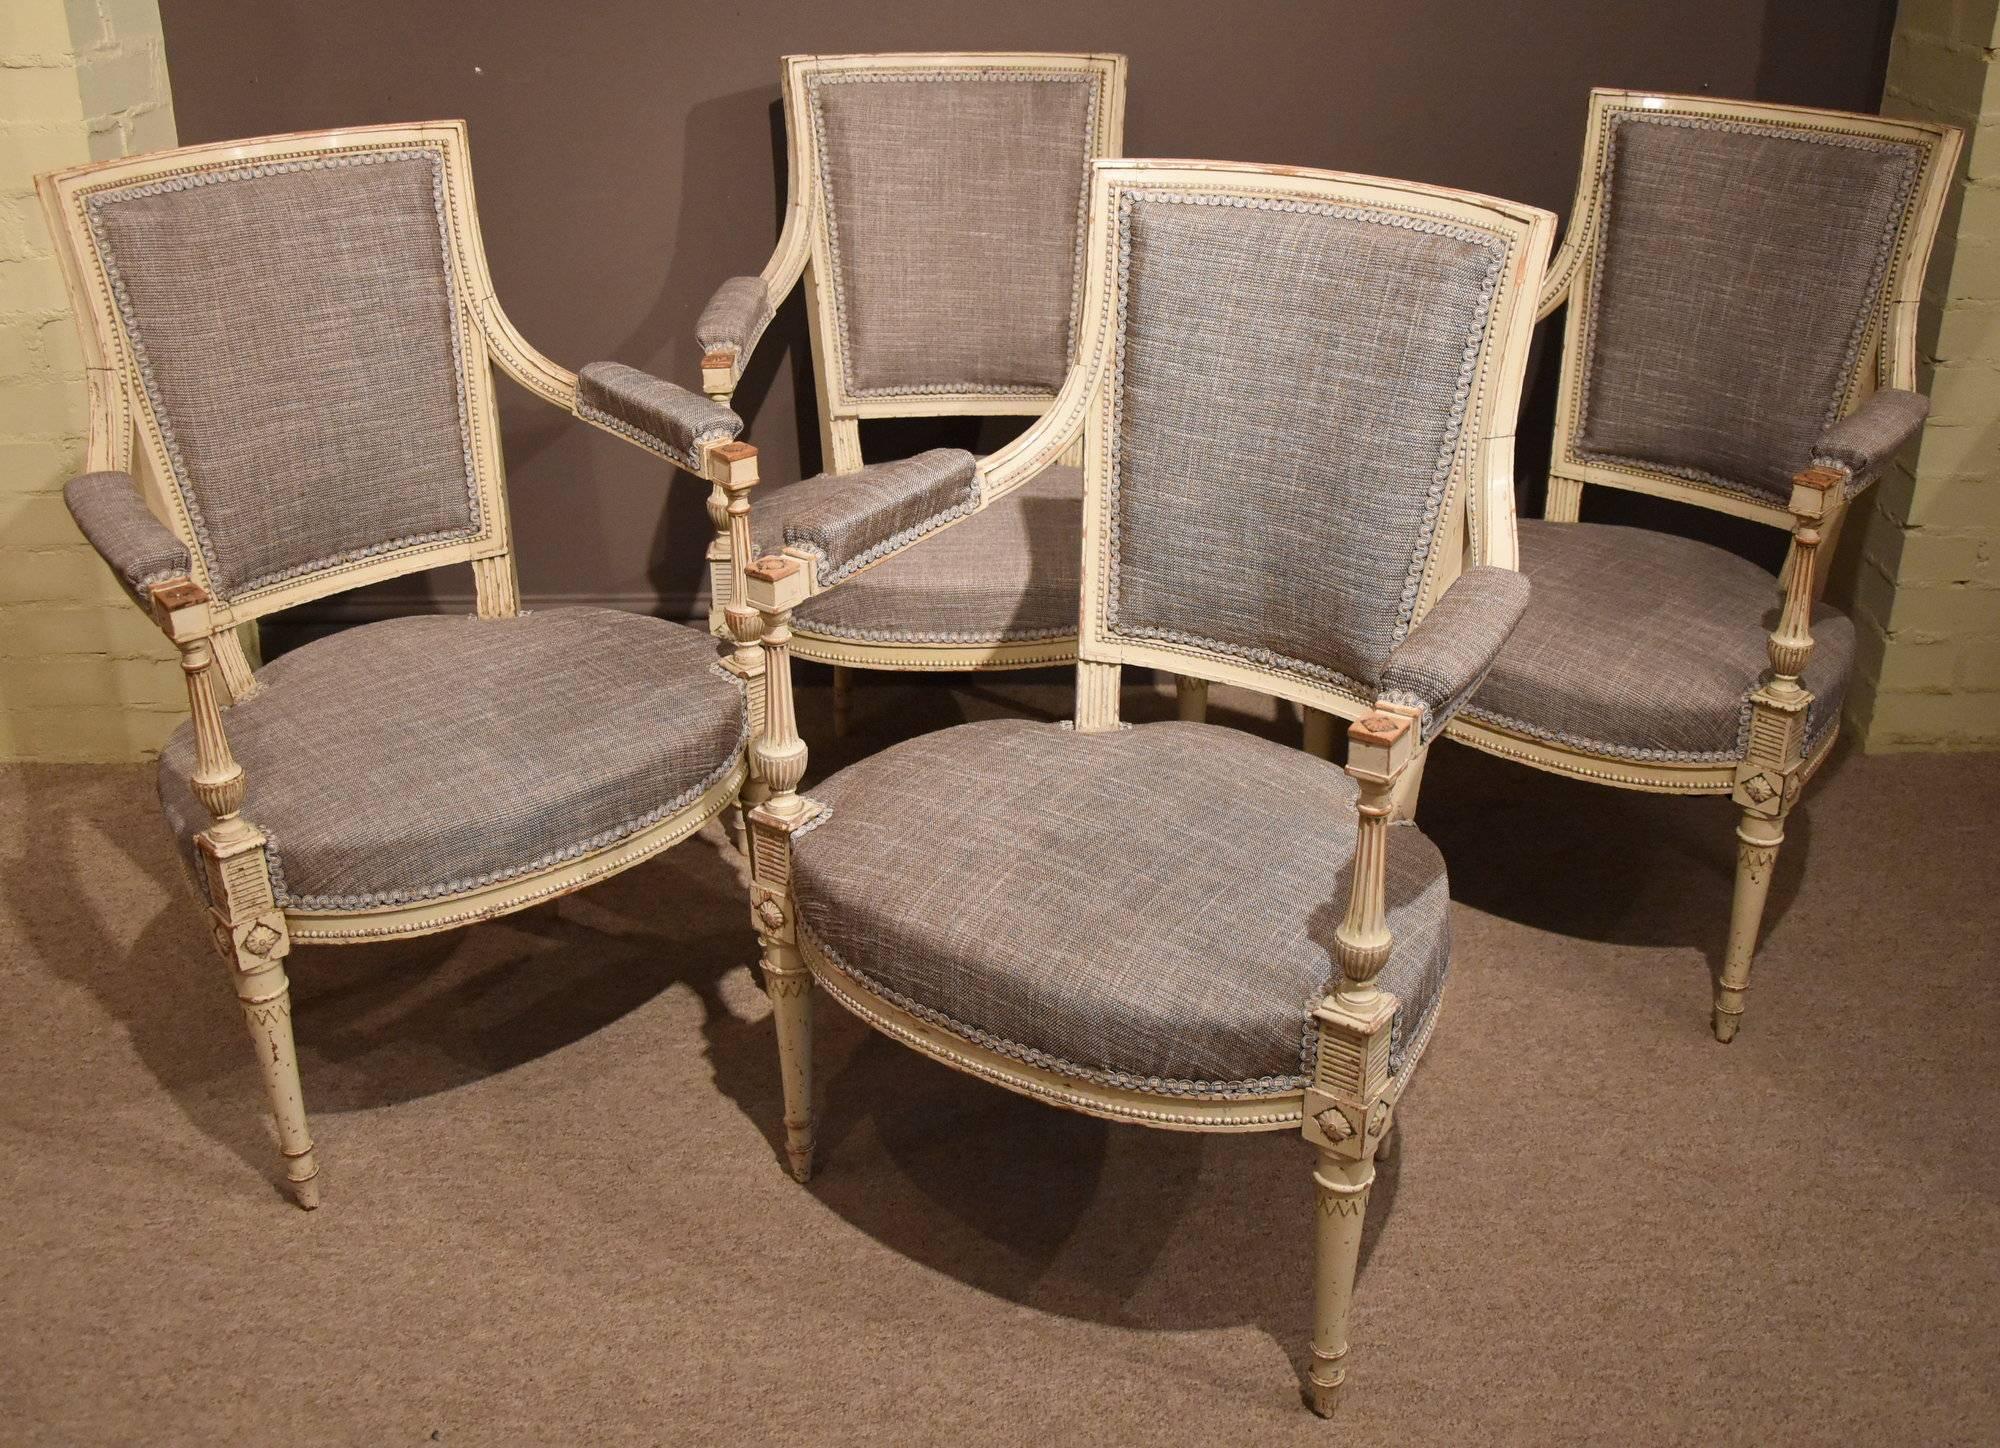 Four French Directoire style armchairs with original paint.

Height 35.5" 89cm.
Width 23.5" 60cm.
Depth 19.5" 48cm.

All of the items that we advertise for sale have been as accurately described as possible and are in excellent